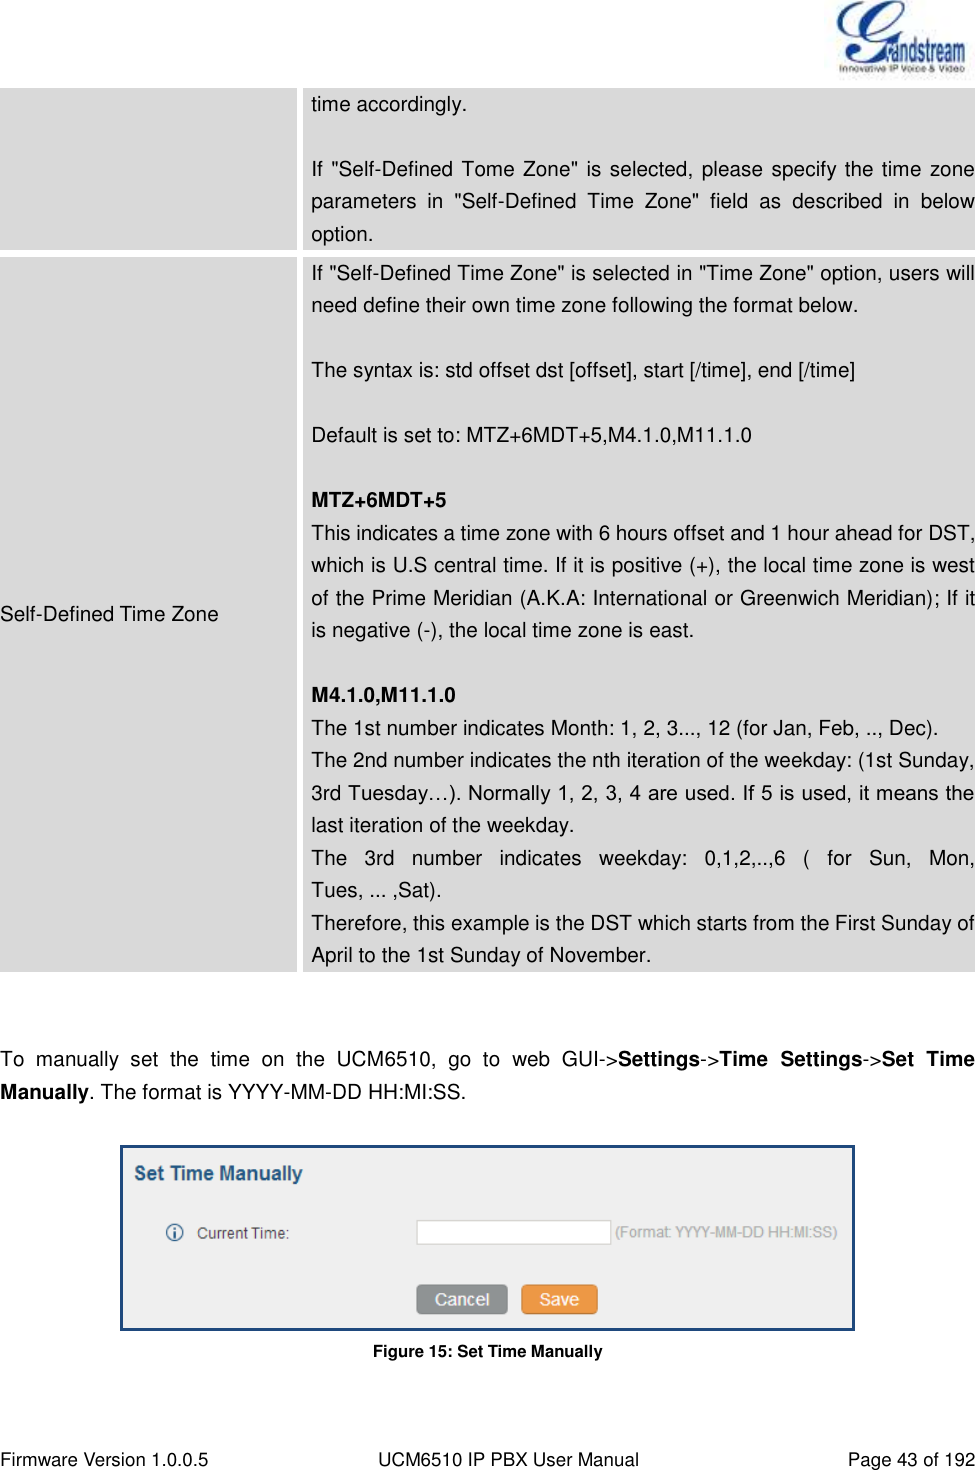  Firmware Version 1.0.0.5 UCM6510 IP PBX User Manual Page 43 of 192  time accordingly.  If &quot;Self-Defined Tome Zone&quot; is selected, please specify the time zone parameters  in  &quot;Self-Defined  Time  Zone&quot;  field  as  described  in  below option. Self-Defined Time Zone If &quot;Self-Defined Time Zone&quot; is selected in &quot;Time Zone&quot; option, users will need define their own time zone following the format below.    The syntax is: std offset dst [offset], start [/time], end [/time]    Default is set to: MTZ+6MDT+5,M4.1.0,M11.1.0  MTZ+6MDT+5 This indicates a time zone with 6 hours offset and 1 hour ahead for DST, which is U.S central time. If it is positive (+), the local time zone is west of the Prime Meridian (A.K.A: International or Greenwich Meridian); If it is negative (-), the local time zone is east.    M4.1.0,M11.1.0   The 1st number indicates Month: 1, 2, 3..., 12 (for Jan, Feb, .., Dec). The 2nd number indicates the nth iteration of the weekday: (1st Sunday,   3rd Tuesday…). Normally 1, 2, 3, 4 are used. If 5 is used, it means the last iteration of the weekday. The  3rd  number  indicates  weekday:  0,1,2,..,6  (  for  Sun,  Mon,   Tues, ... ,Sat). Therefore, this example is the DST which starts from the First Sunday of   April to the 1st Sunday of November.   To  manually  set  the  time  on  the  UCM6510,  go  to  web  GUI-&gt;Settings-&gt;Time  Settings-&gt;Set  Time Manually. The format is YYYY-MM-DD HH:MI:SS.   Figure 15: Set Time Manually  